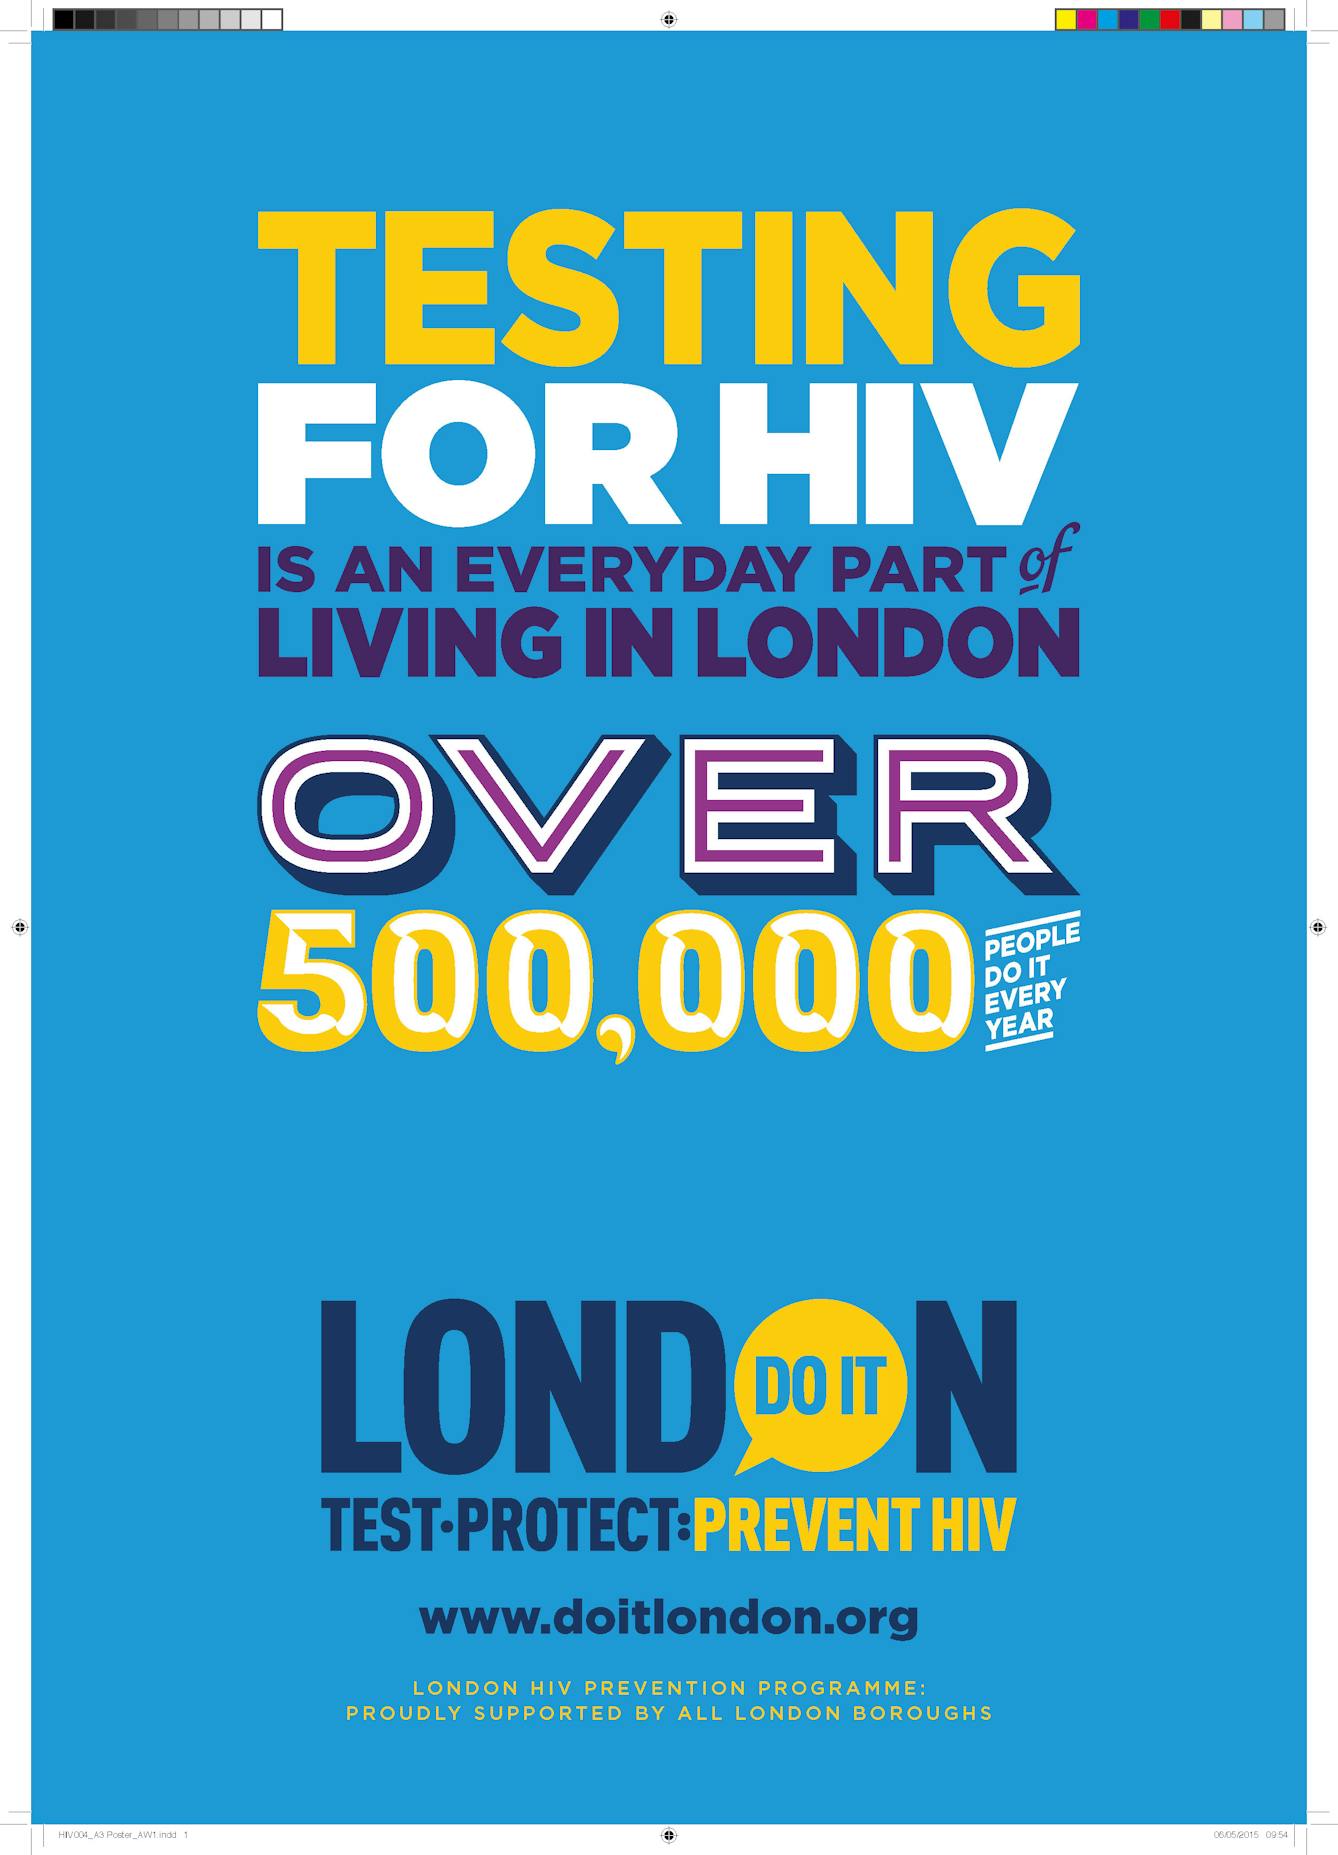 Do It London campaign poster stating "Testing for HIV is an everyday part of living in London. Over 500,000 people do it every year."